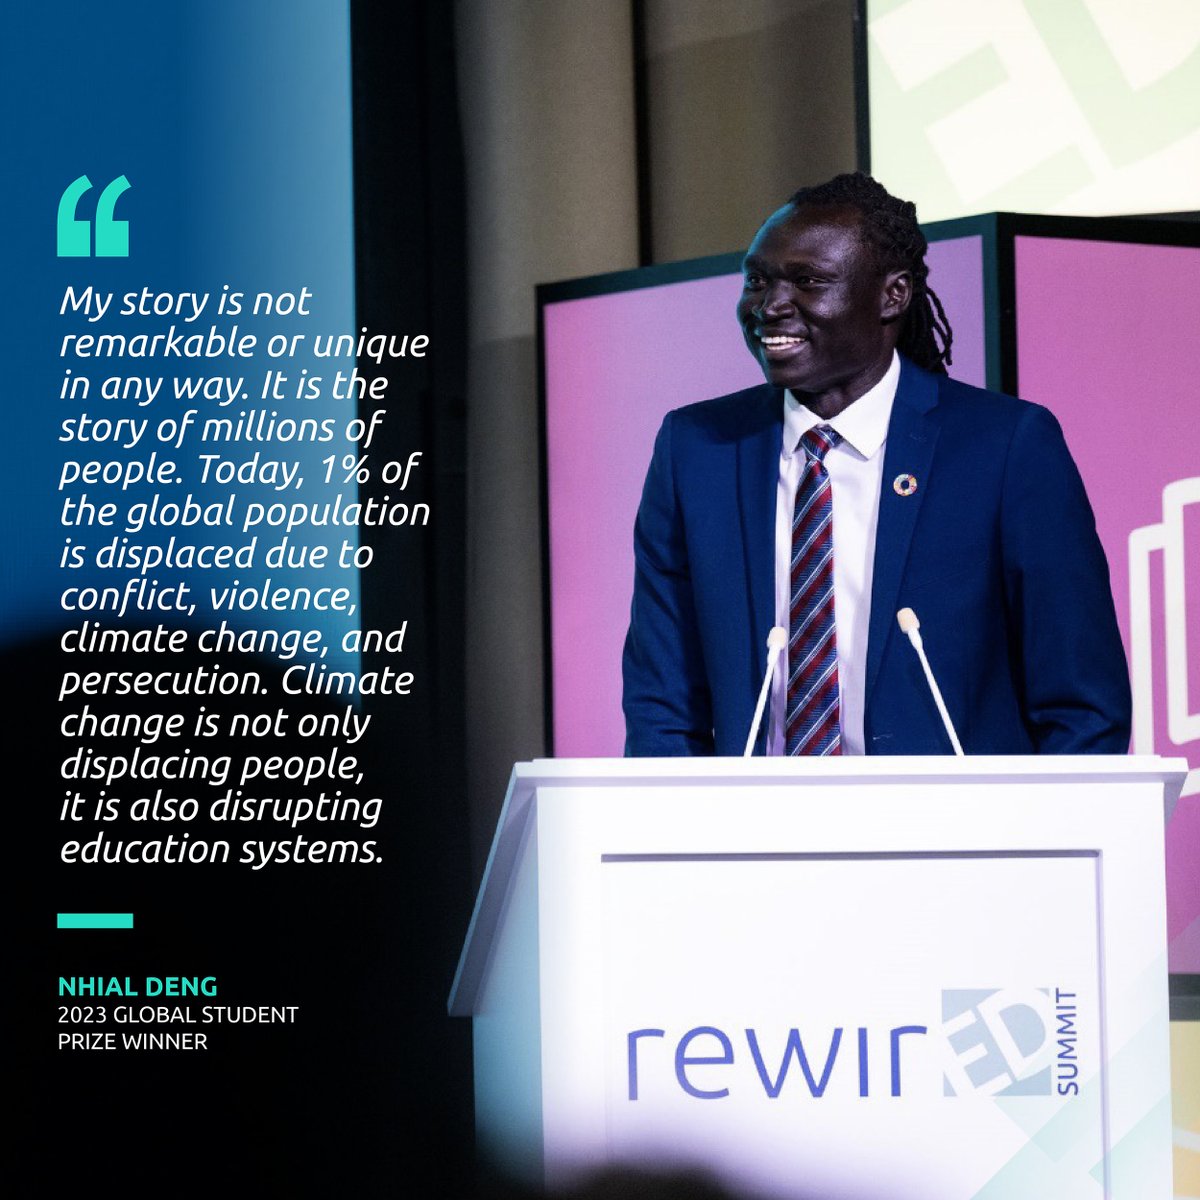 The RewirEd Summit 2023 at COP28 UAE was an opportunity to highlight the powerful impact of #education on #people and #communities globally. @nhialgdeng, the 2023 Global Student Prize @cheggdotorg winner from #SouthSudan, shared his inspiring story, recounting his journey from